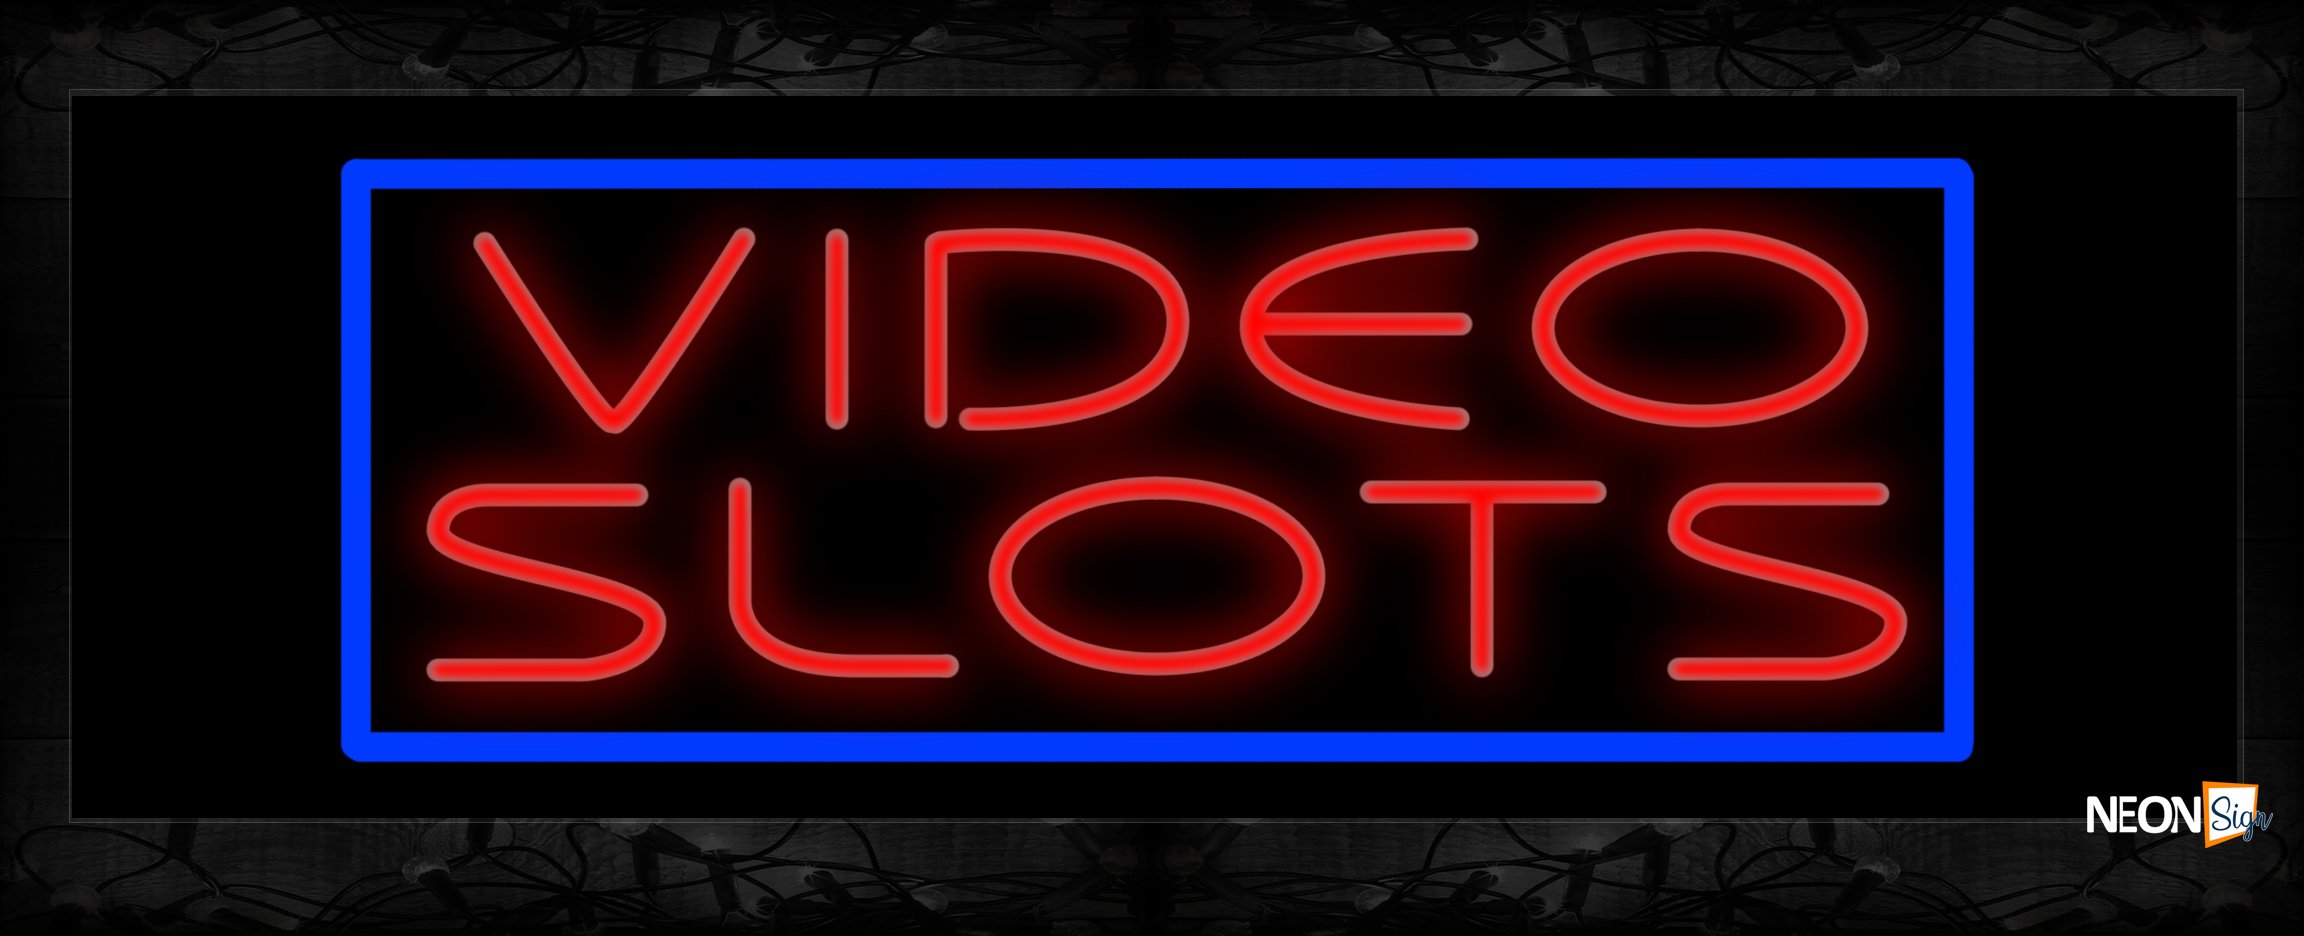 Image of 11502 Video Slots in red with blue border Neon Sign 13x32 Black Backing